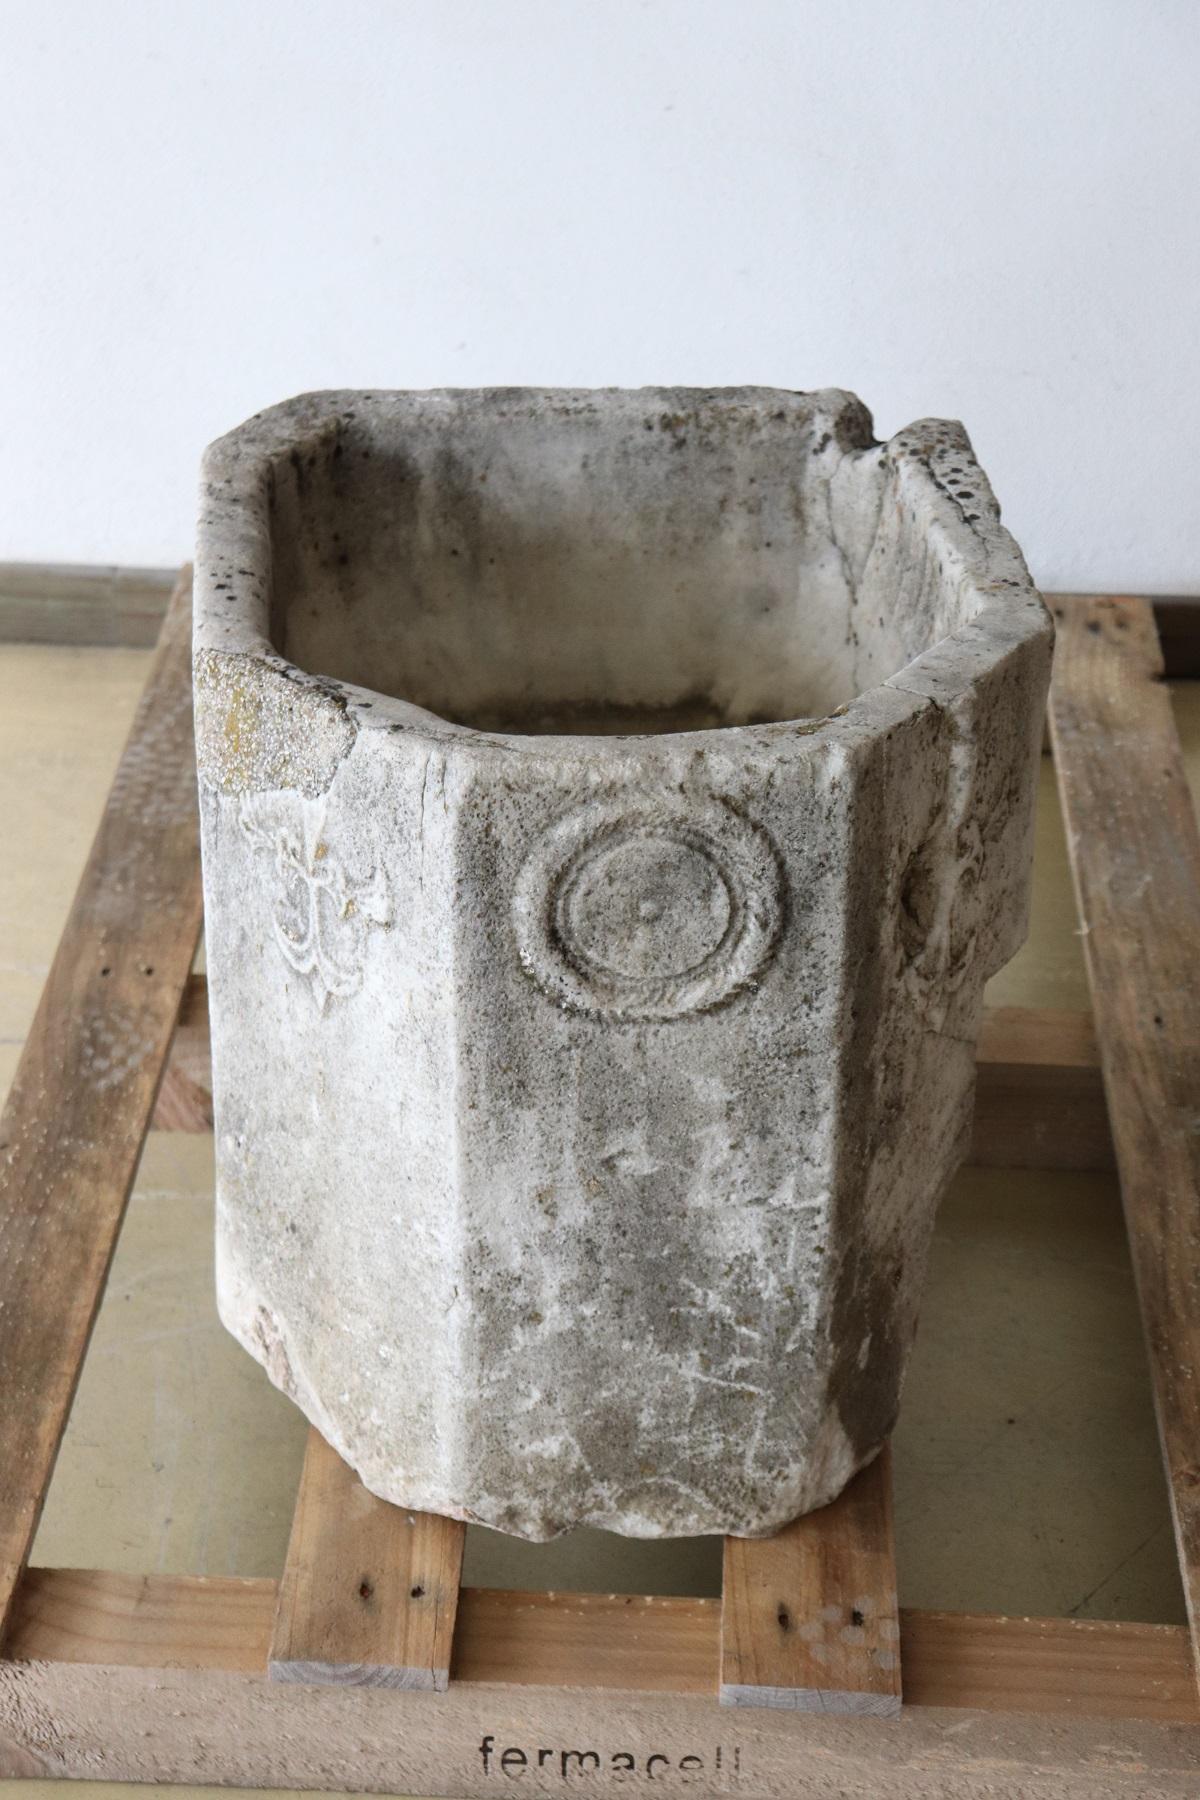 This antique sink is a rare item of the Italian Renaissance 16th century. Made of hexagonal marble it has some coats of arms carved on the sides. These coats of arms are reminiscent of those in the Florence area. Originally this sink was supported